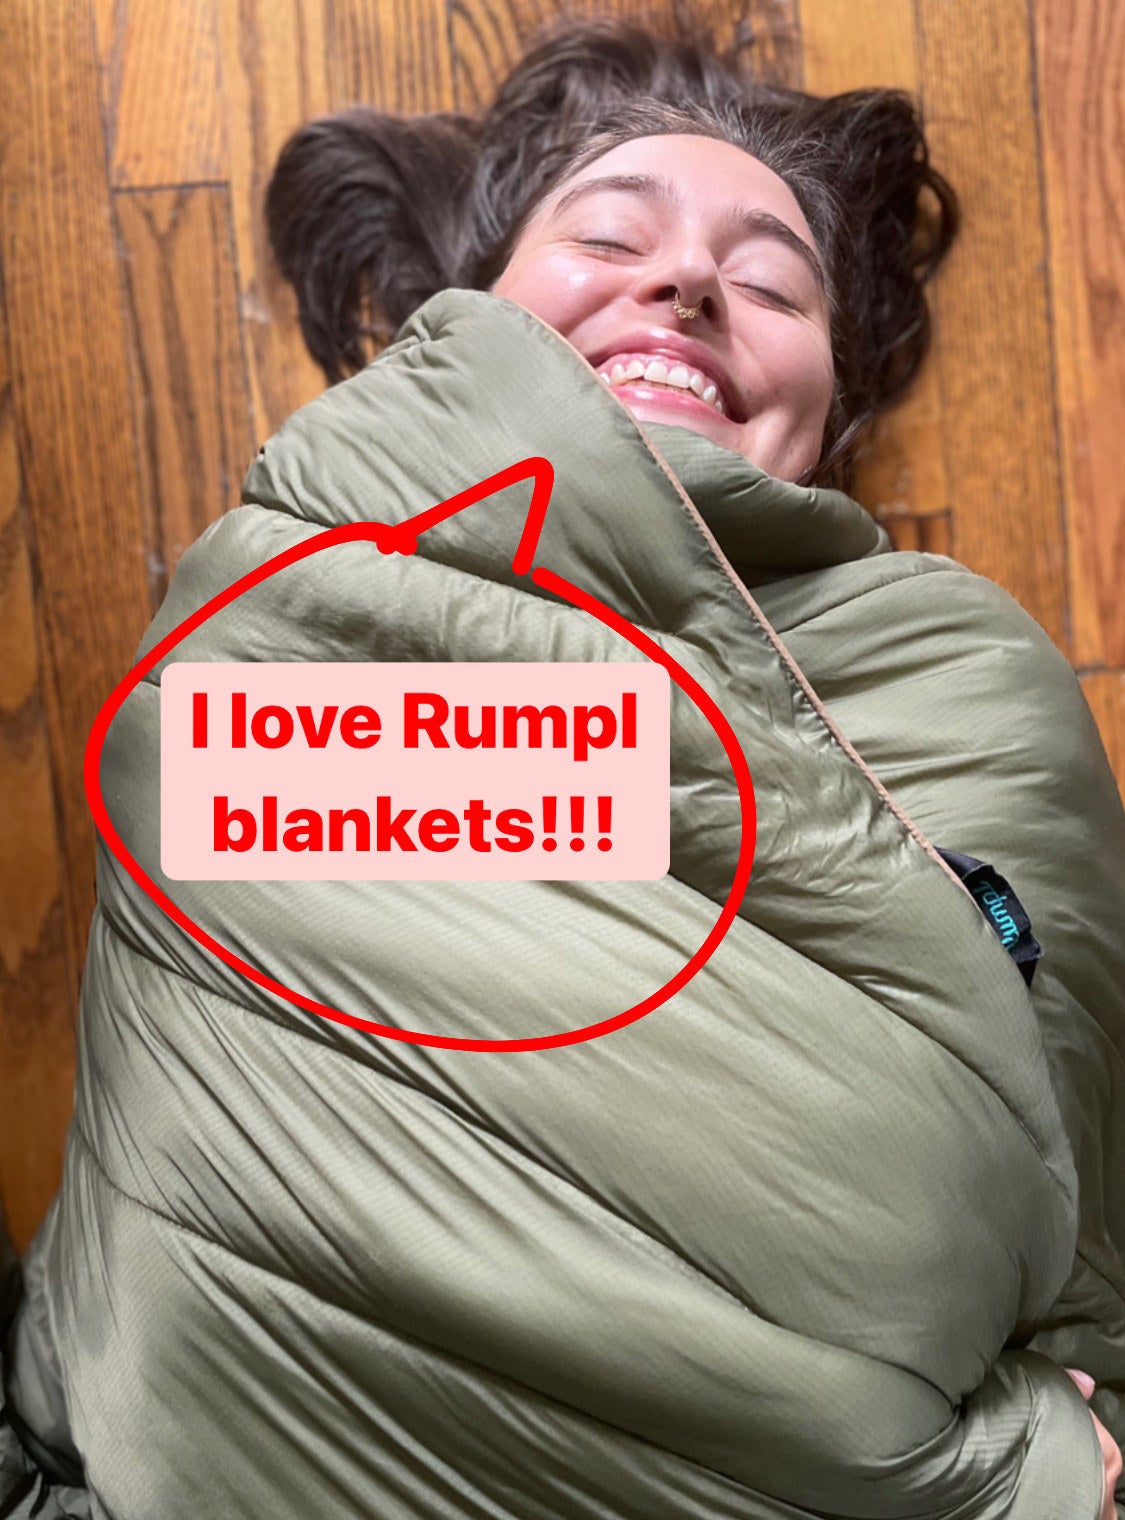 the writer laying on the floor wrapped in the blanket with a speech bubble saying &quot;I love Rumpl blankets&quot;